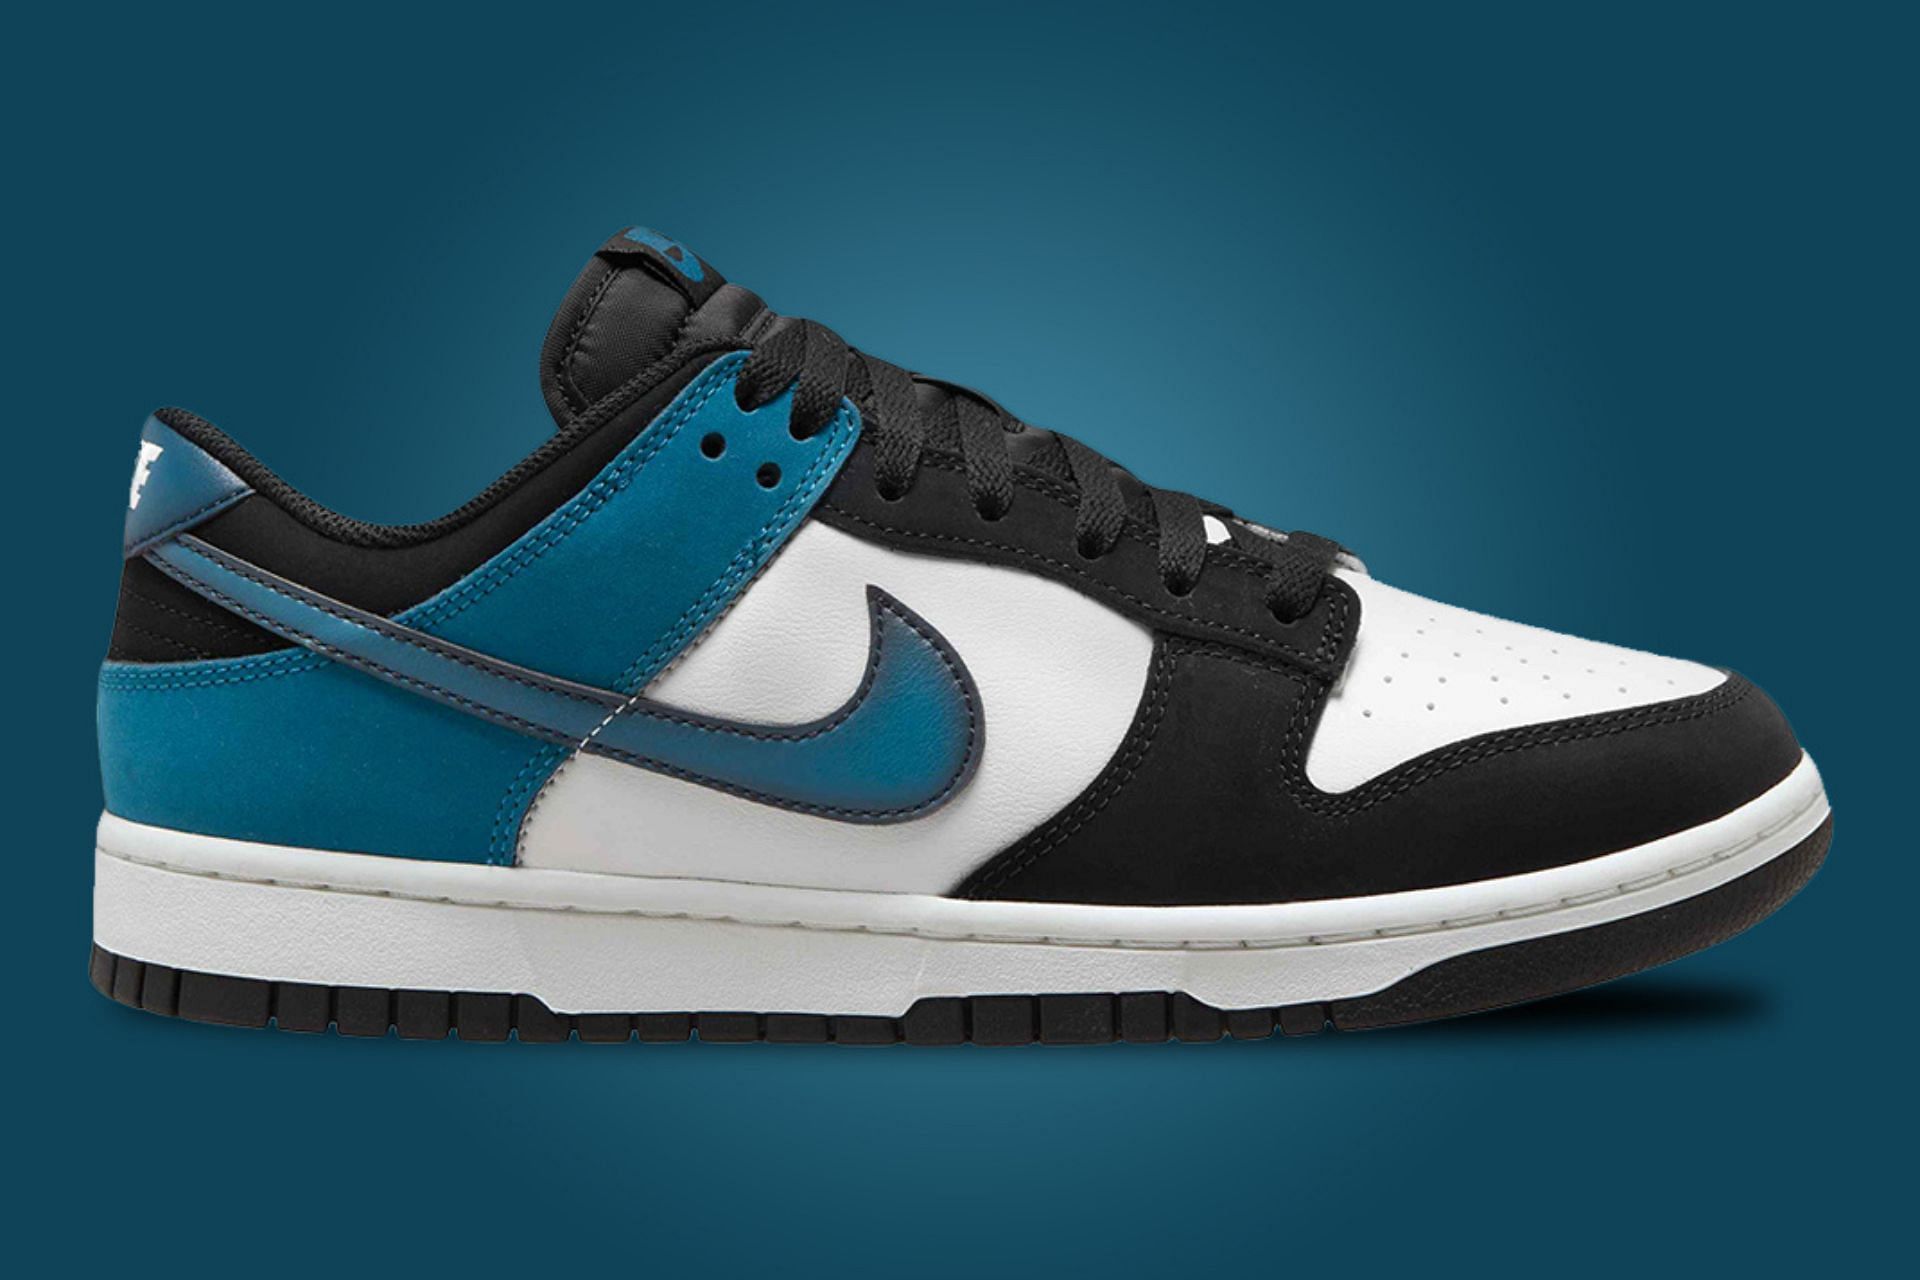 Nike Dunk Low “Black Industrial Blue” shoes: Where to buy, price